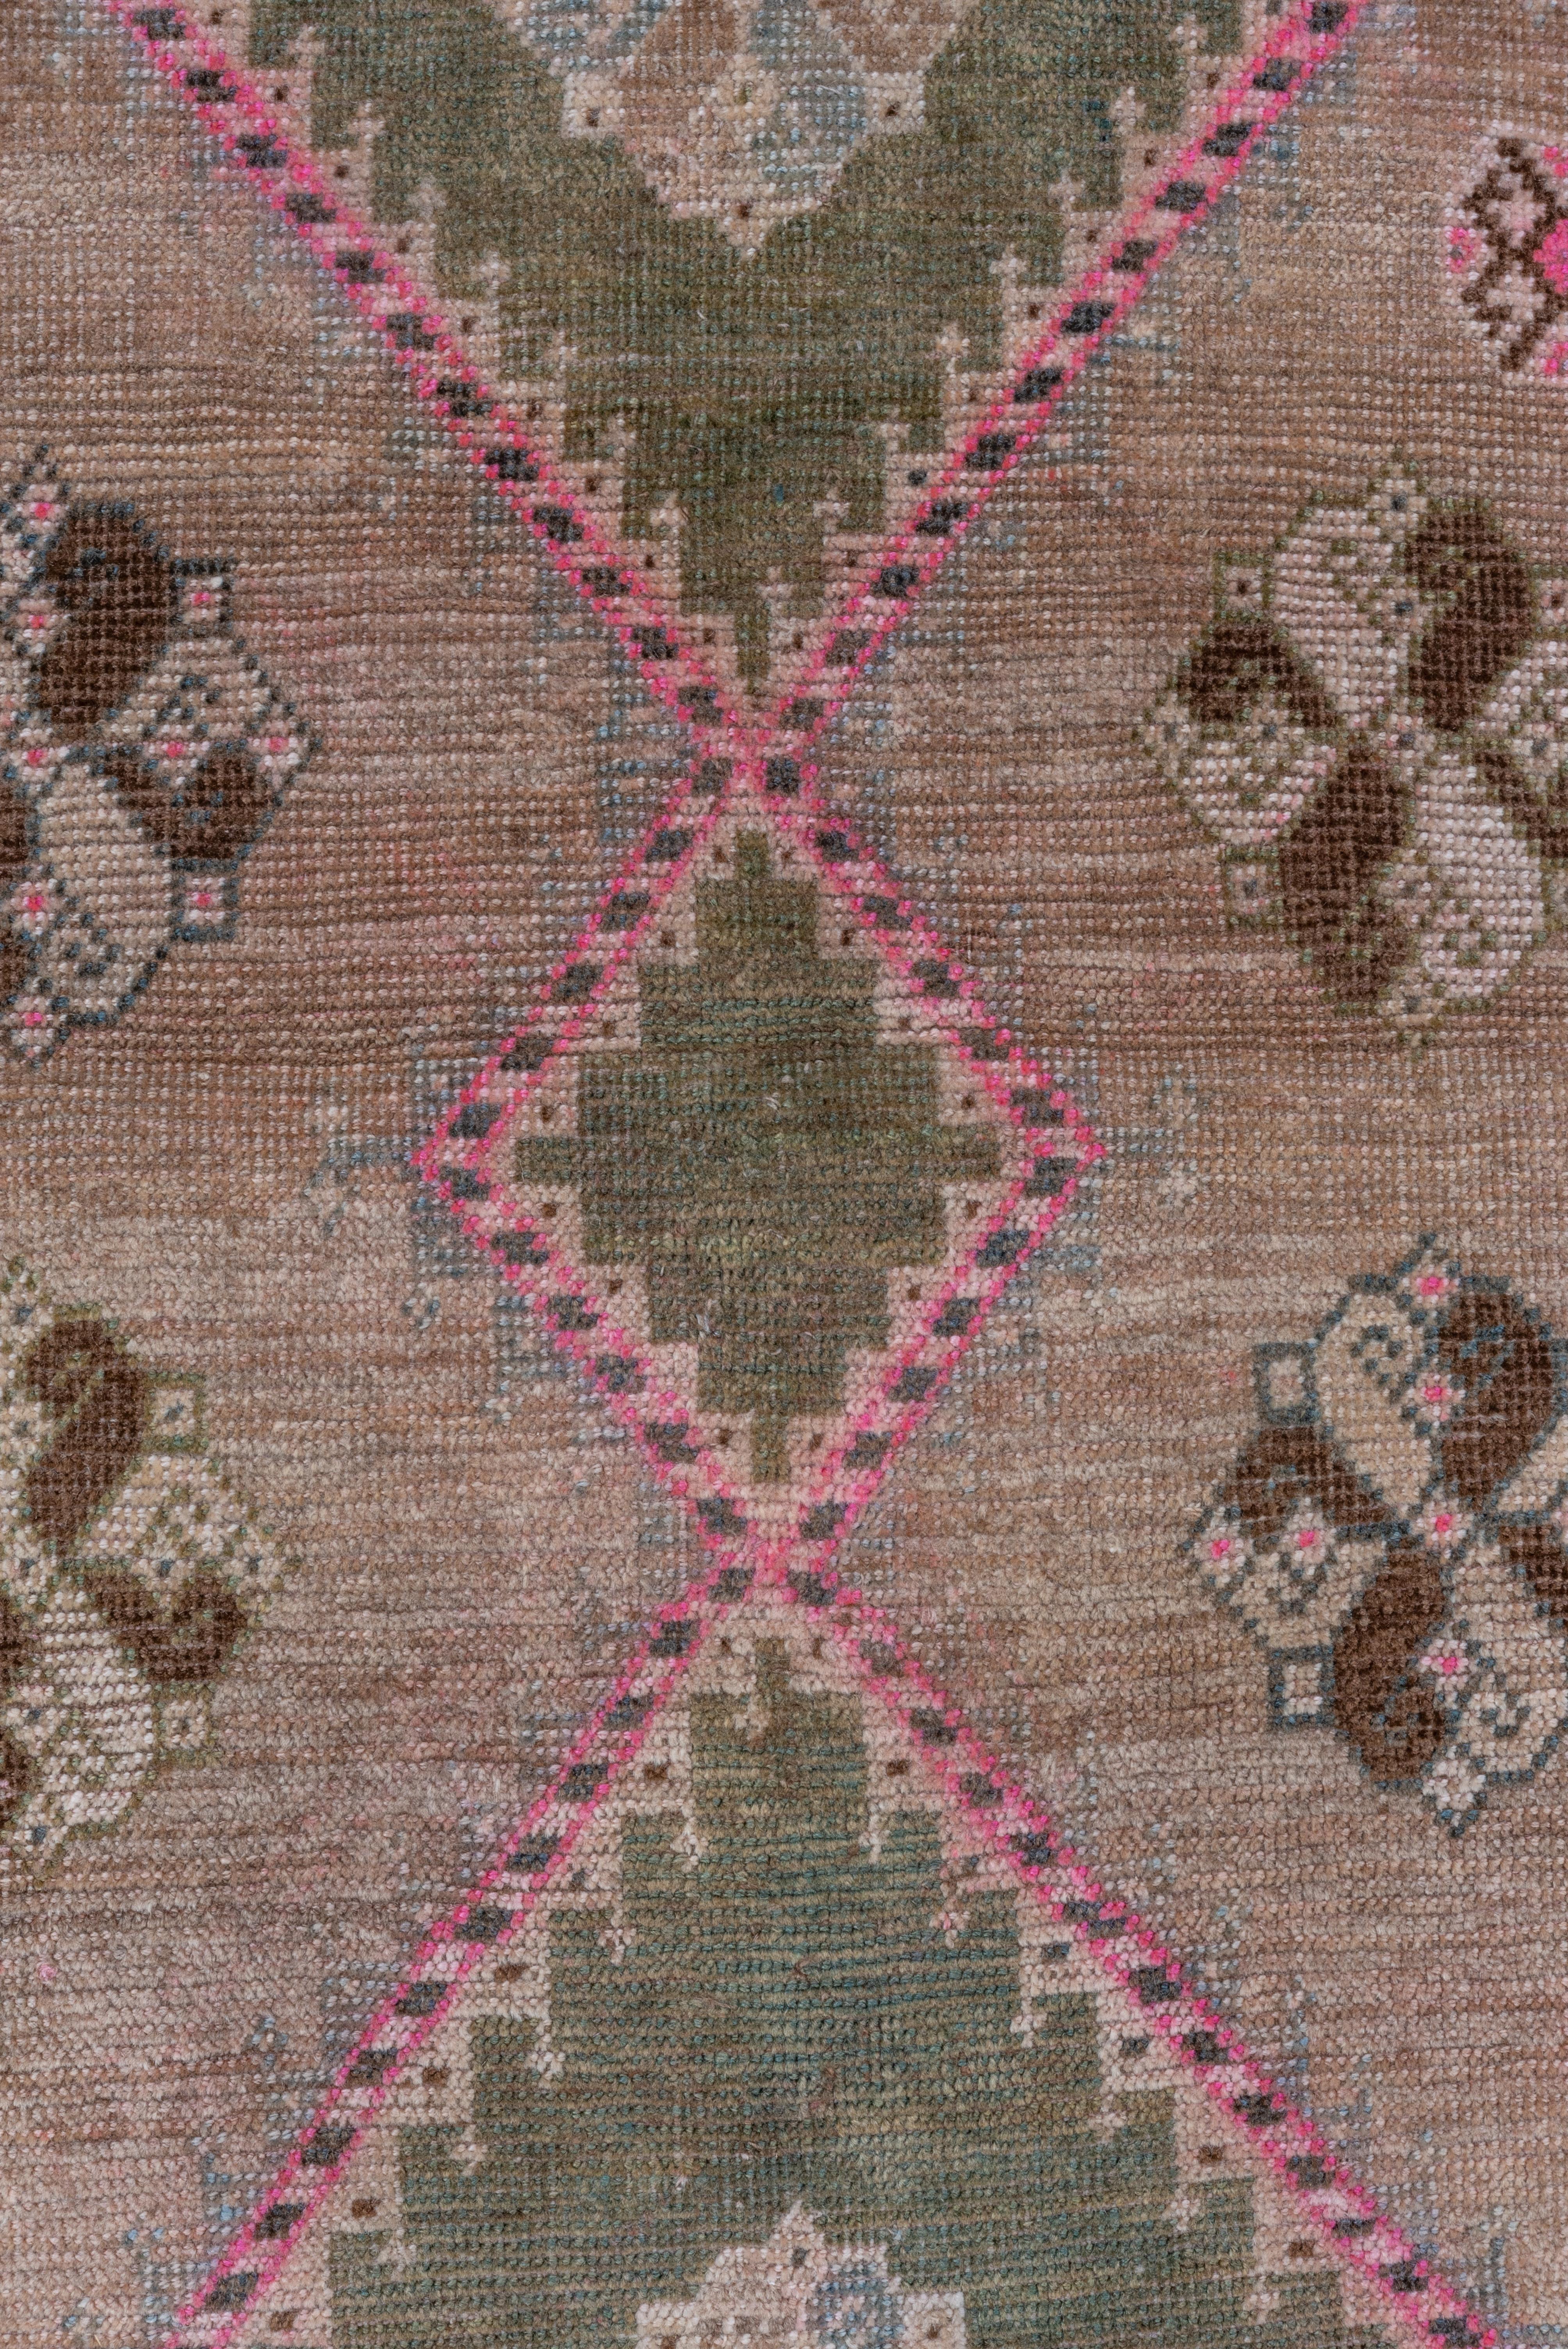 Mid-20th Century Antique Persian Gabbeh Rug, Light Brown Field, Pink & Green Accents, circa 1930s For Sale